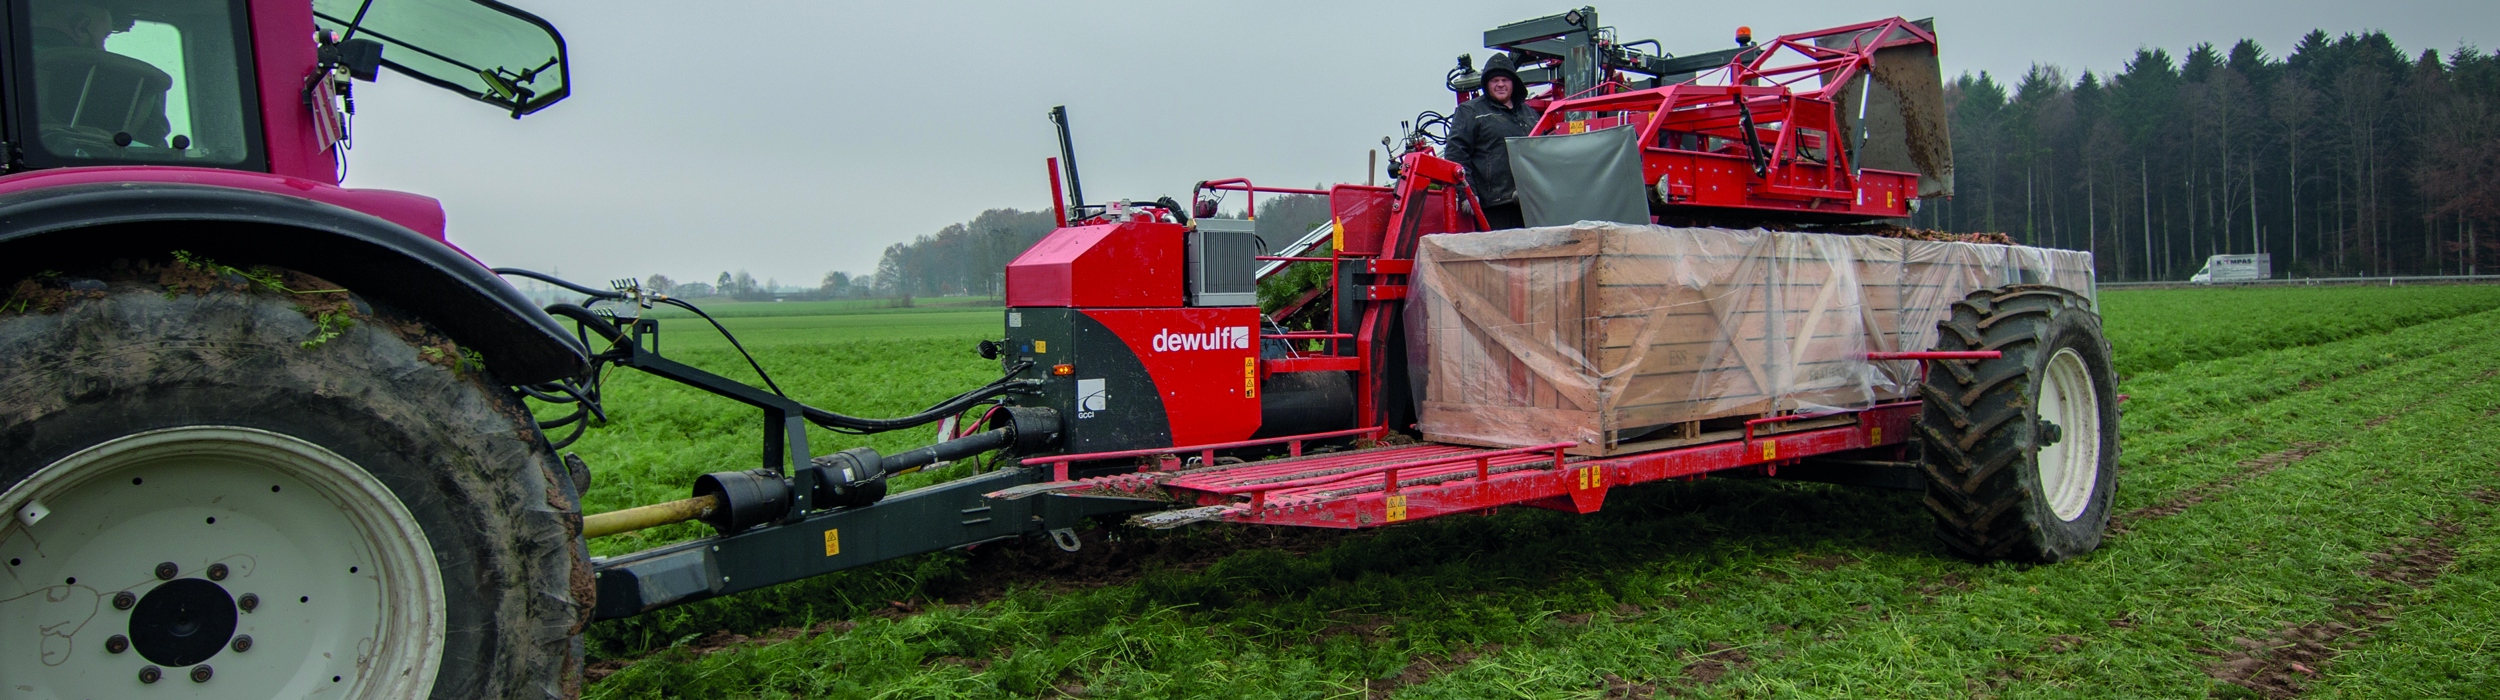 Trailed 1-row top lifting harvester with continuous container transport system